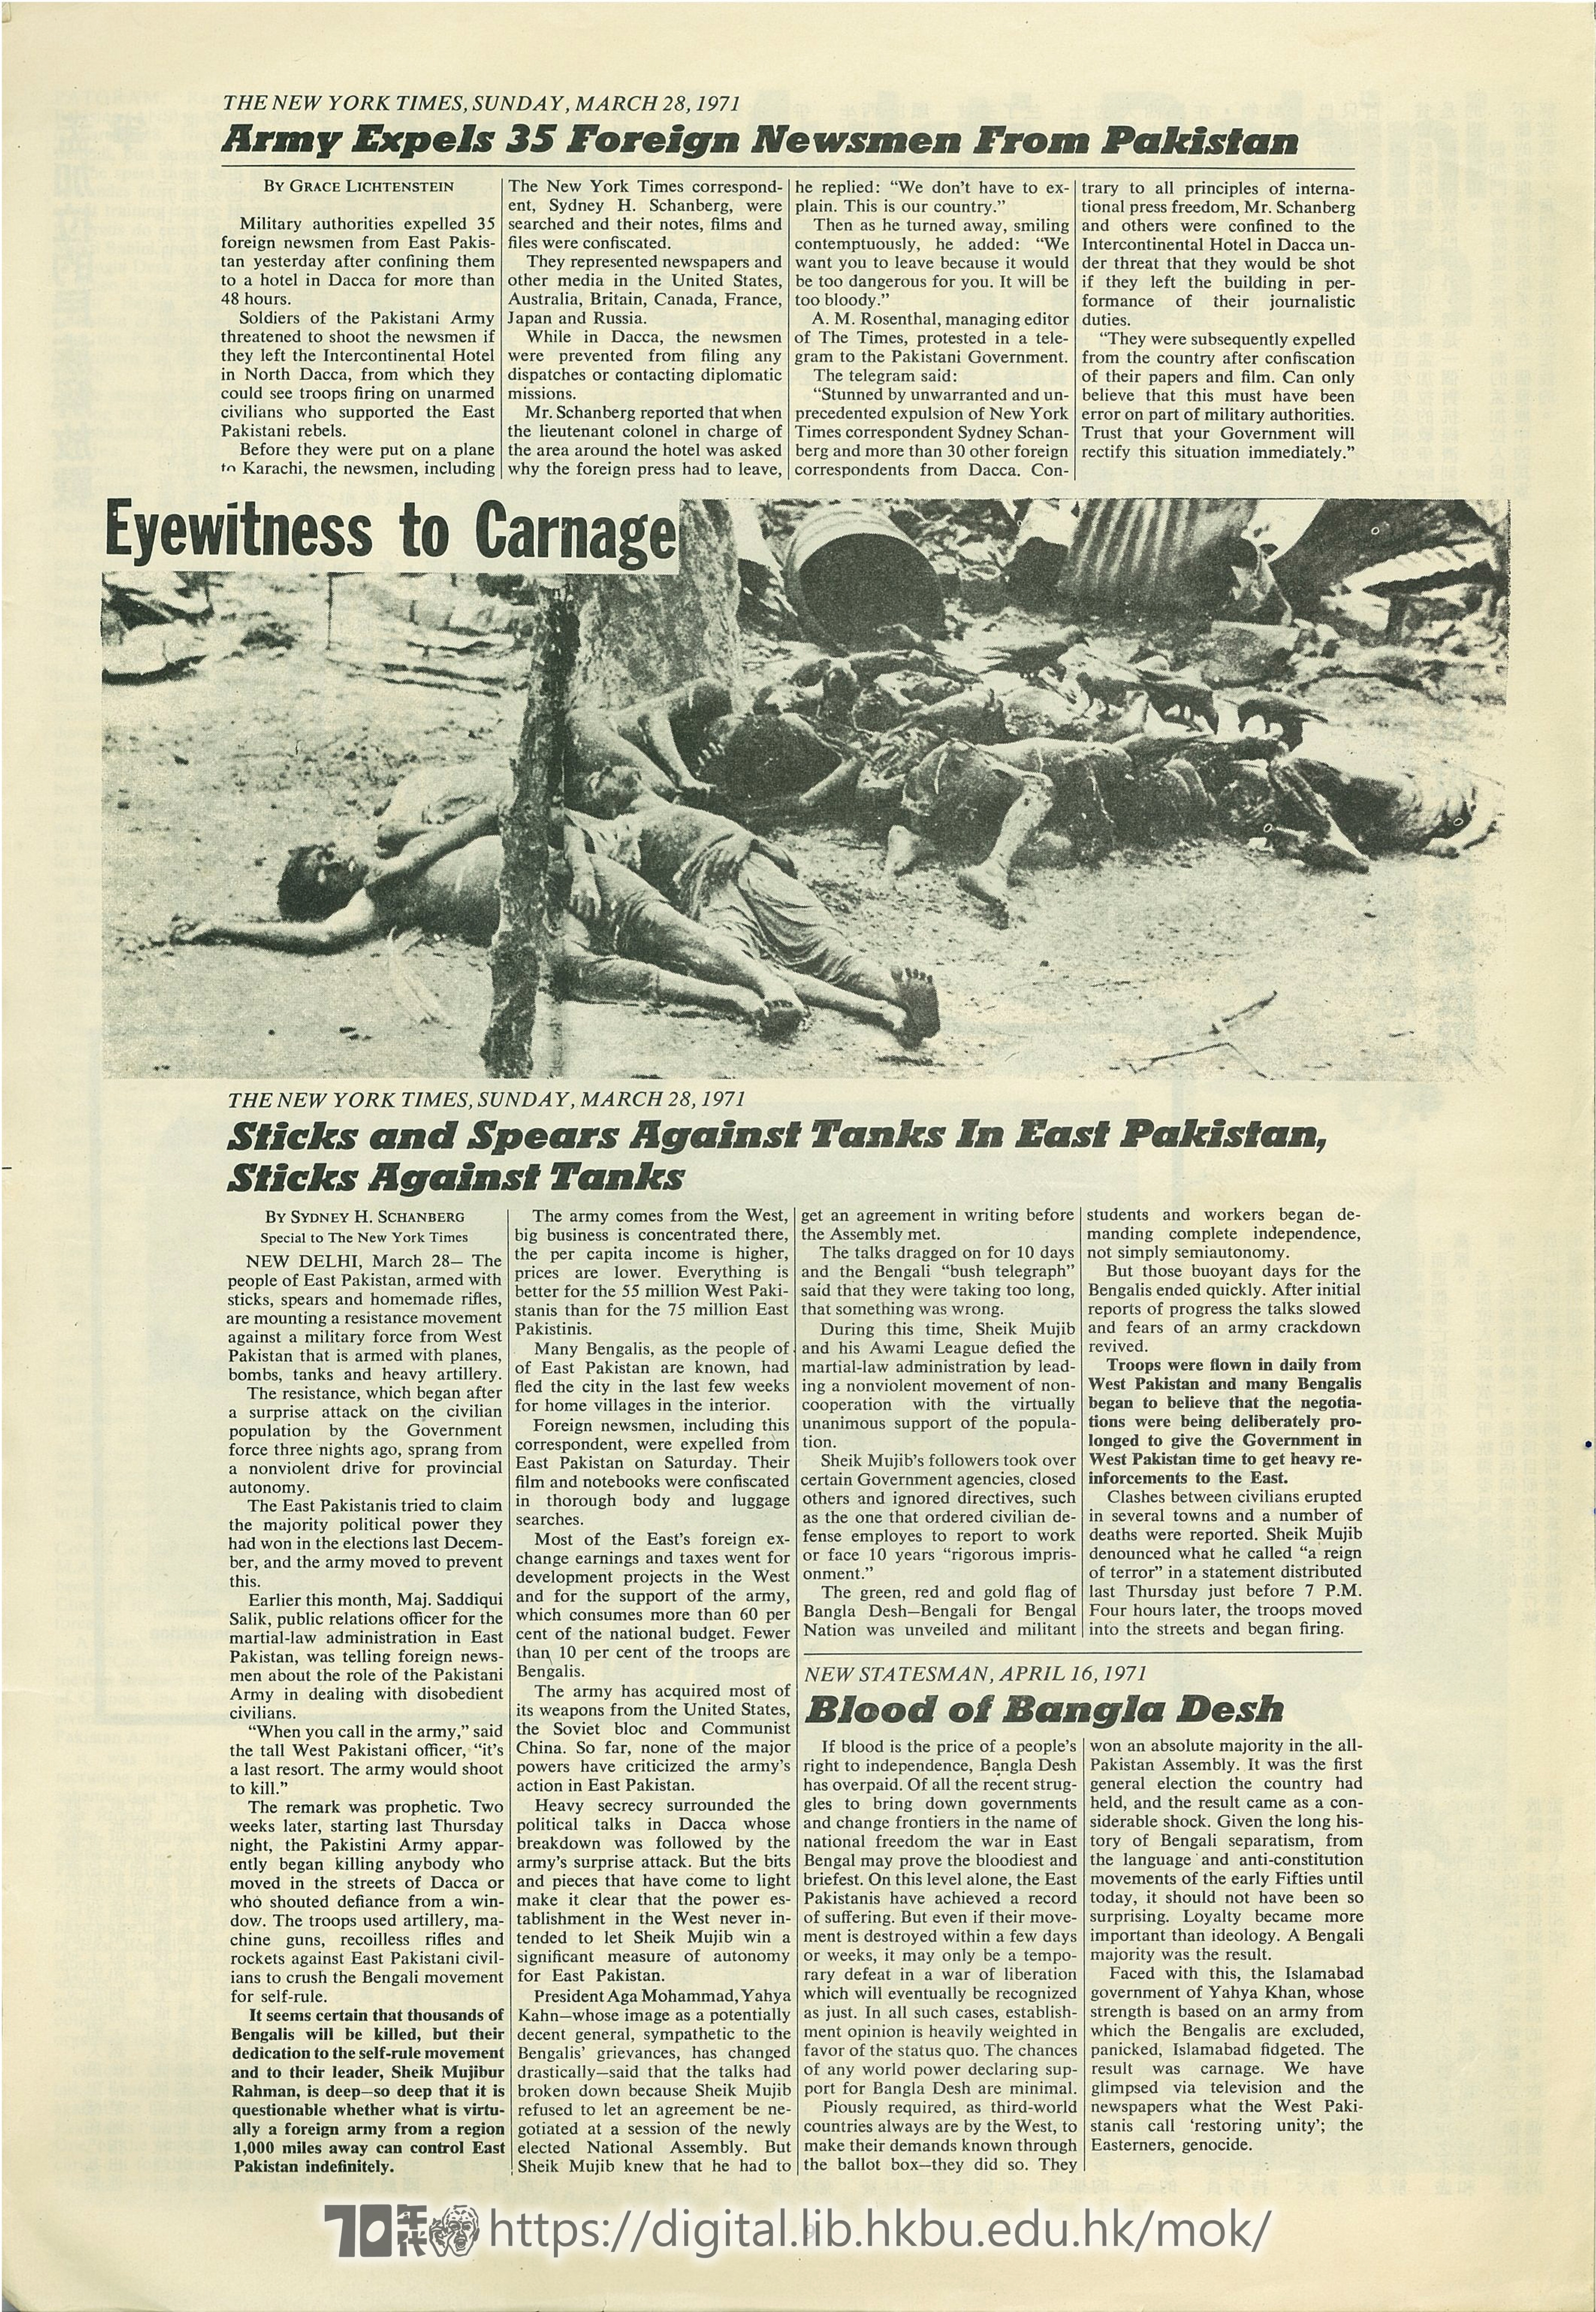  Special Issue Army expels 35 foreign newsmen from Pakistan The New York Times, Sunday, March 28, 1971 